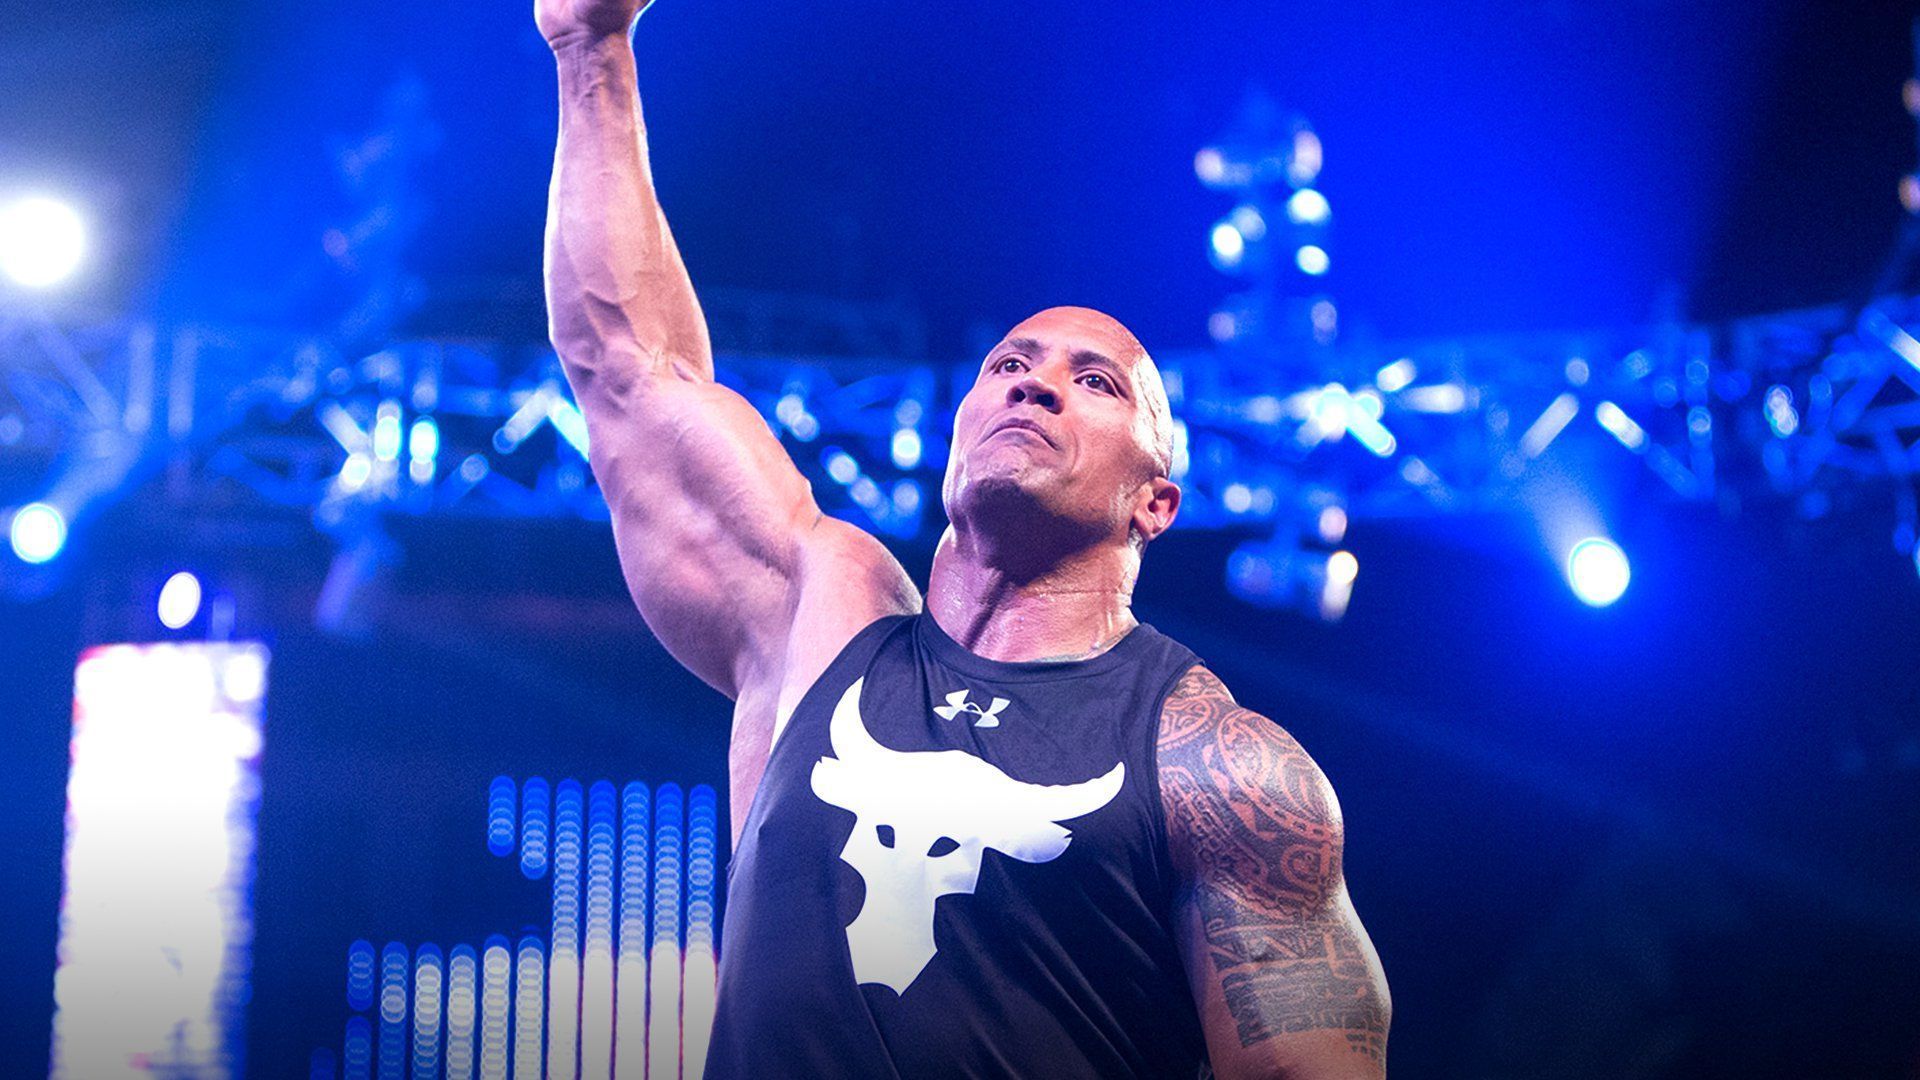 The Rock is expected to make a huge comeback soon.